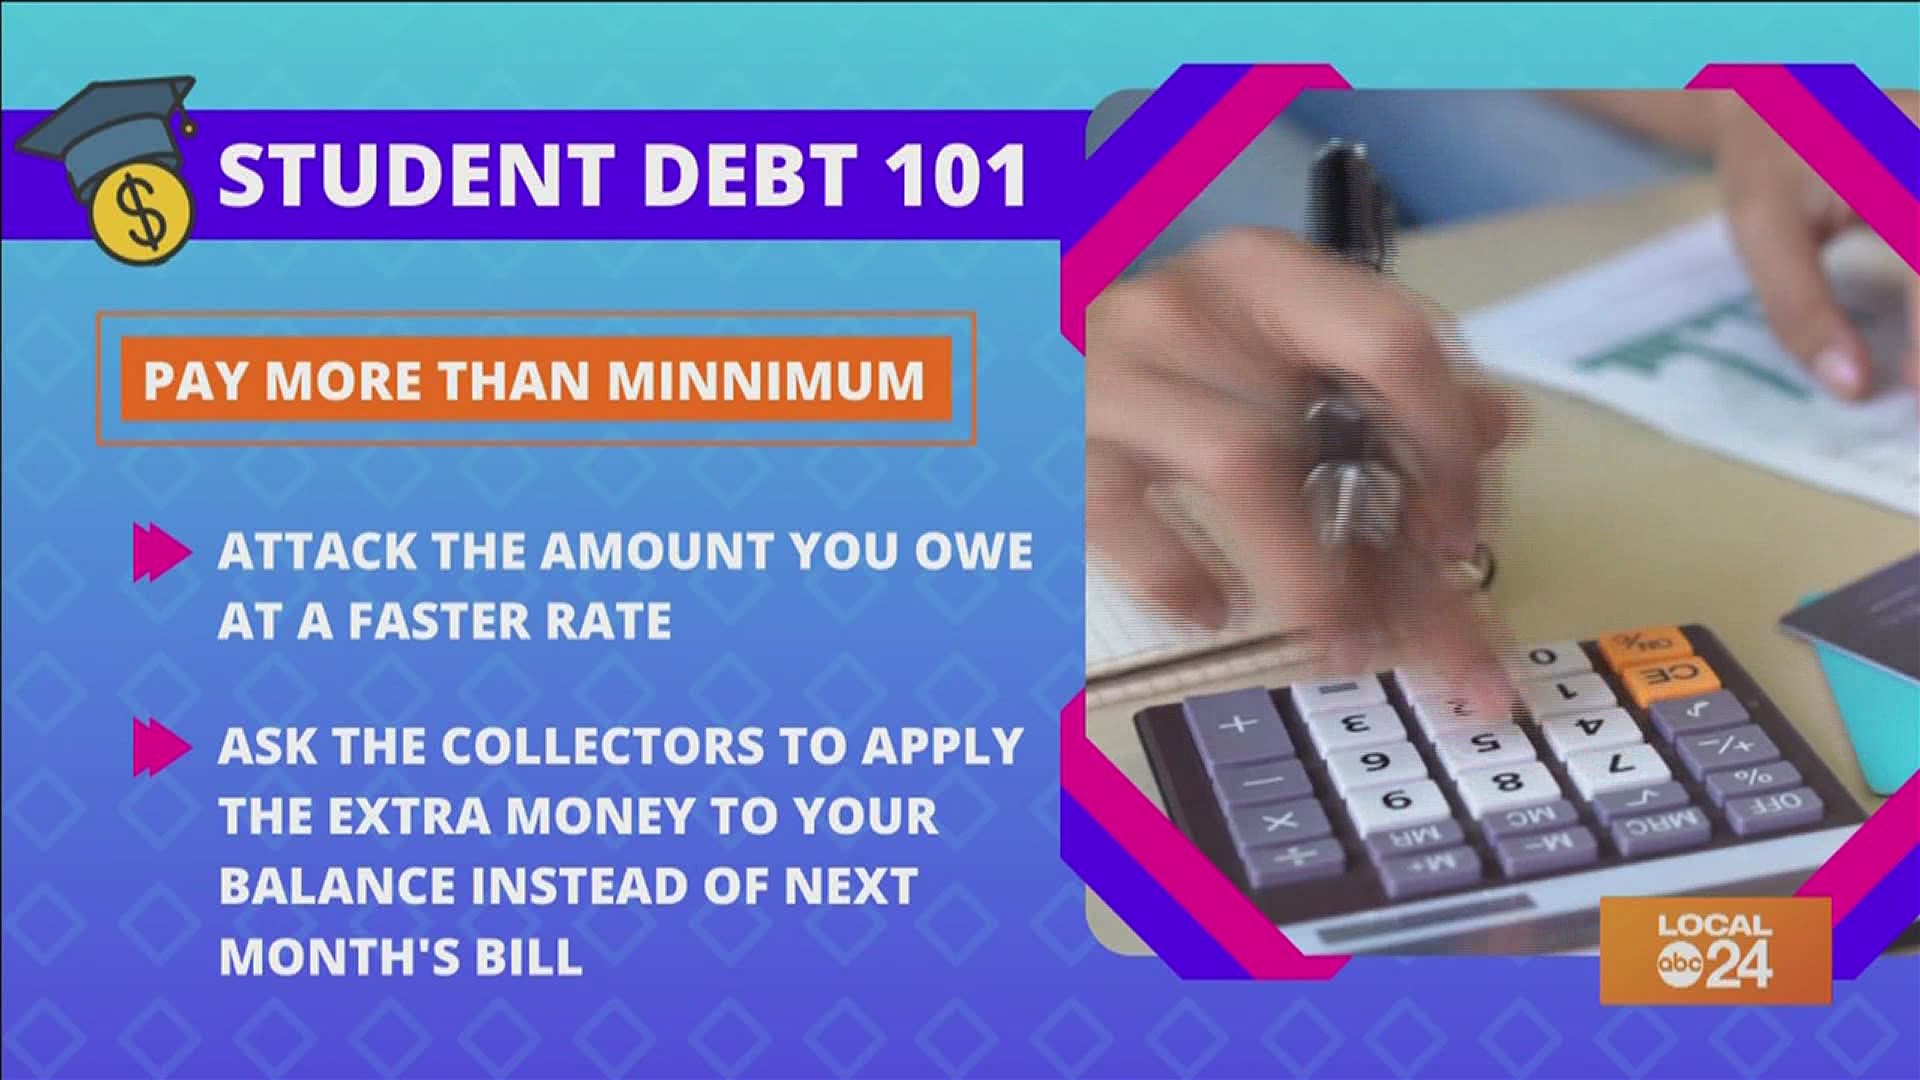 Don't let student debt control your life! End it once and for all with these tips from lifestyle host Sydney Neely! Only on "The Shortcut!"